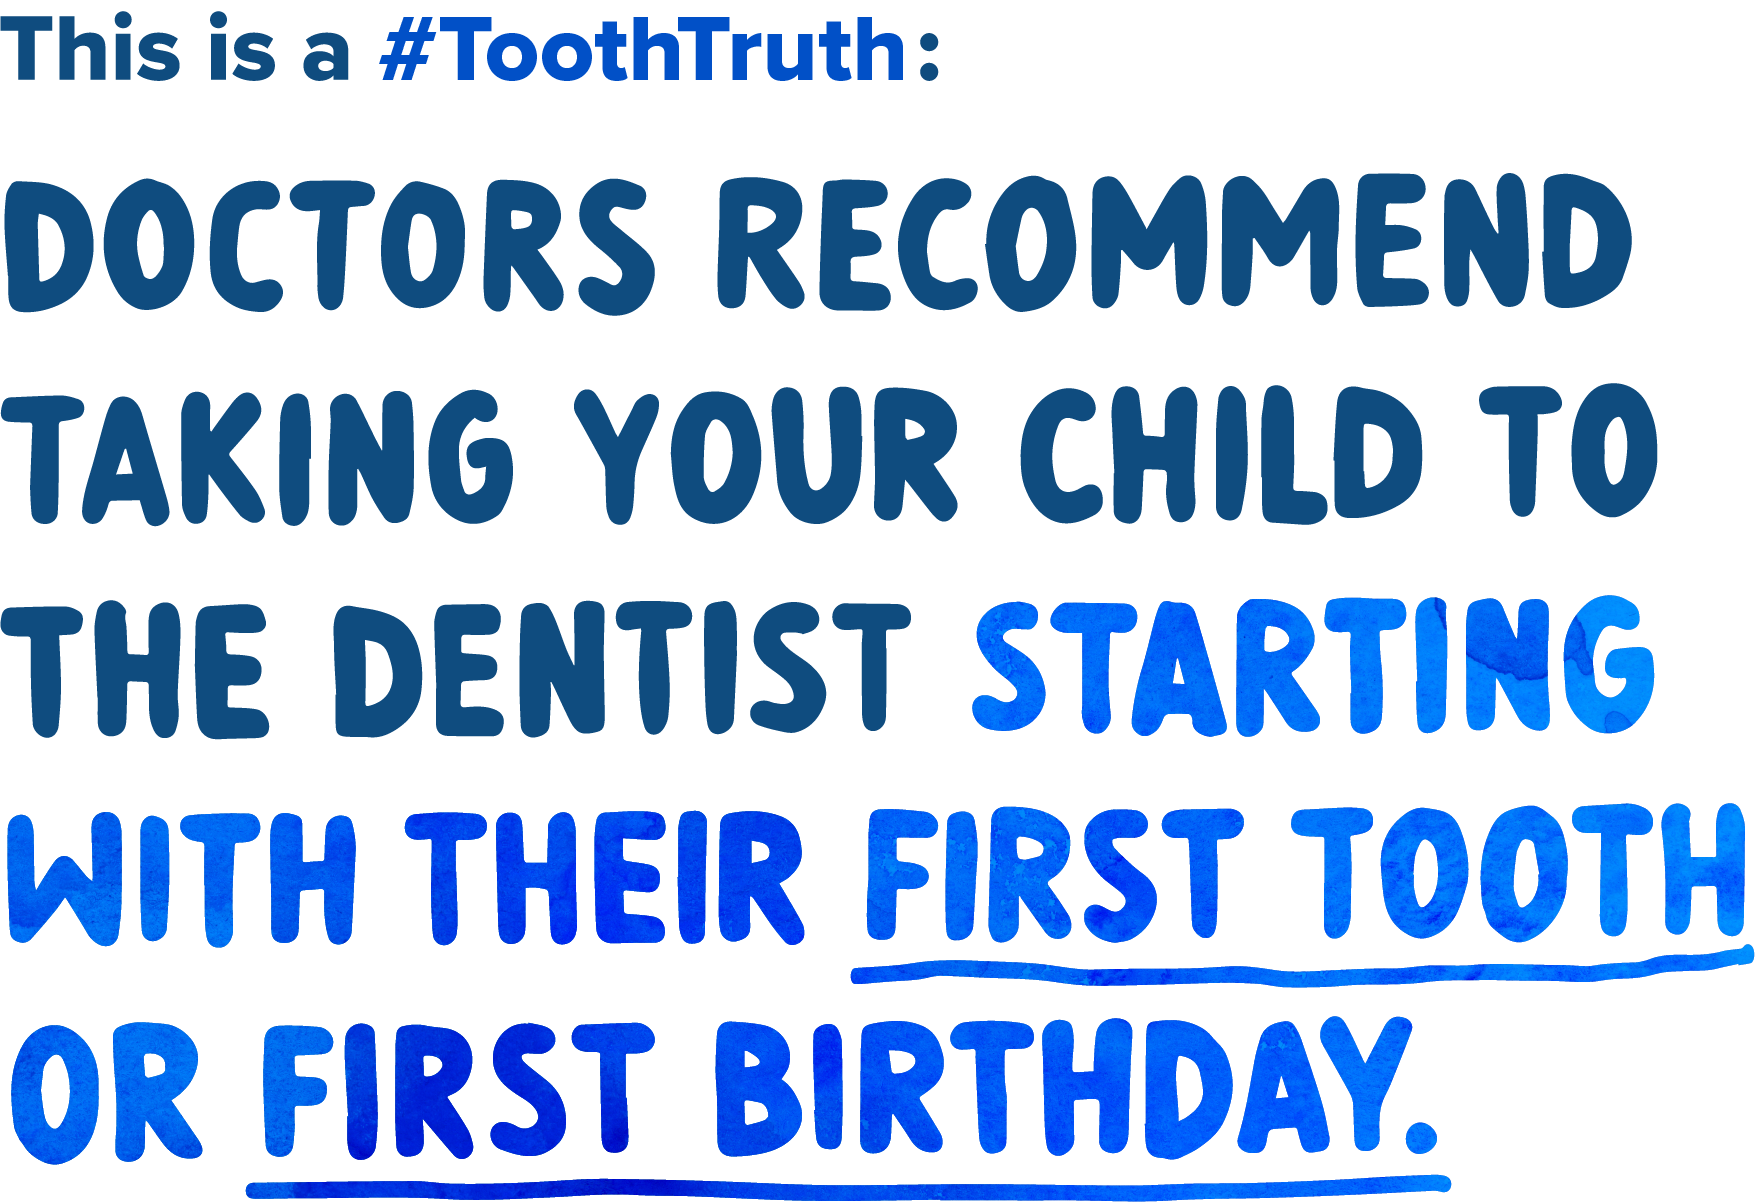 Doctors recommend taking your child to the dentist starting with their first tooth or first birthday.